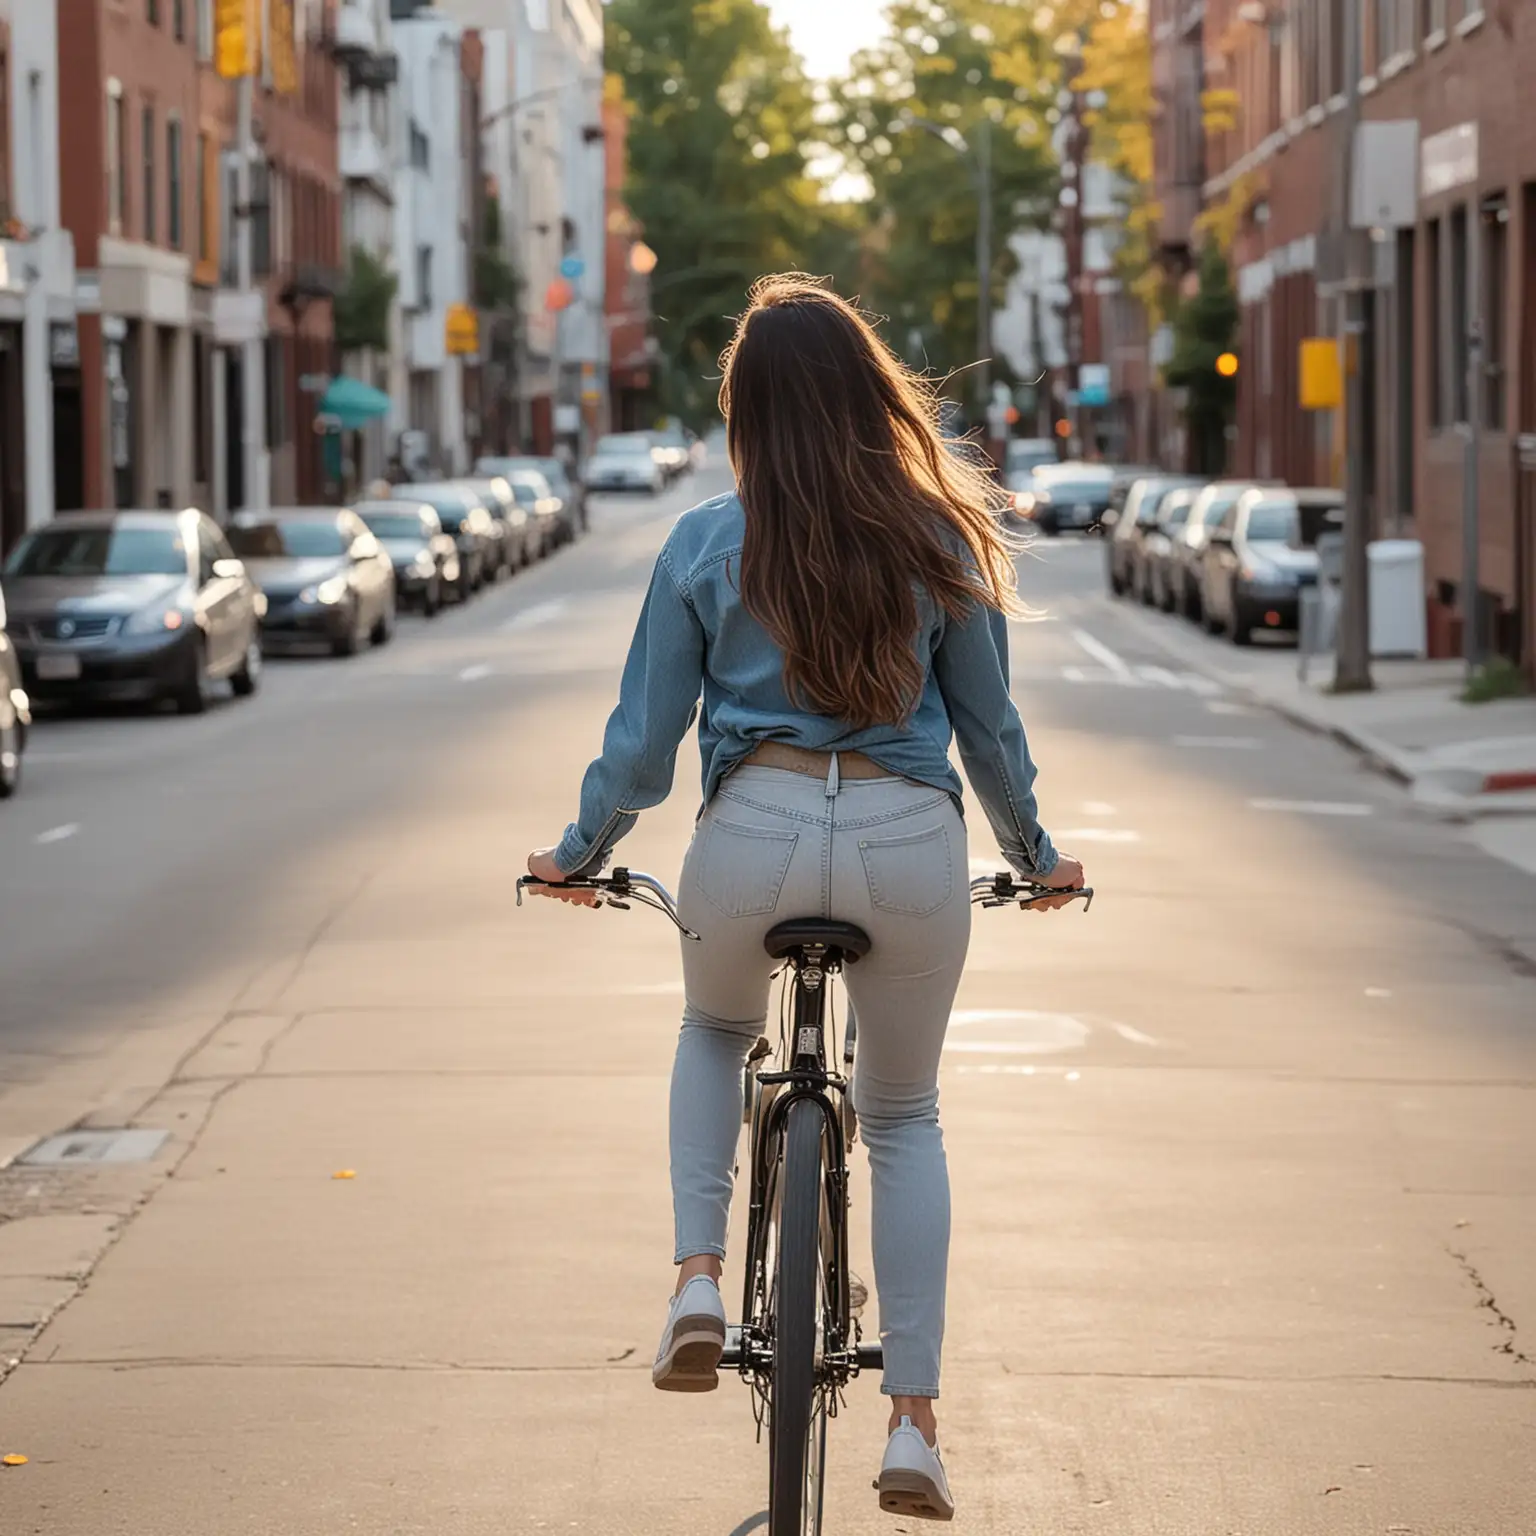 Young North American Woman Riding Bicycle on City Street